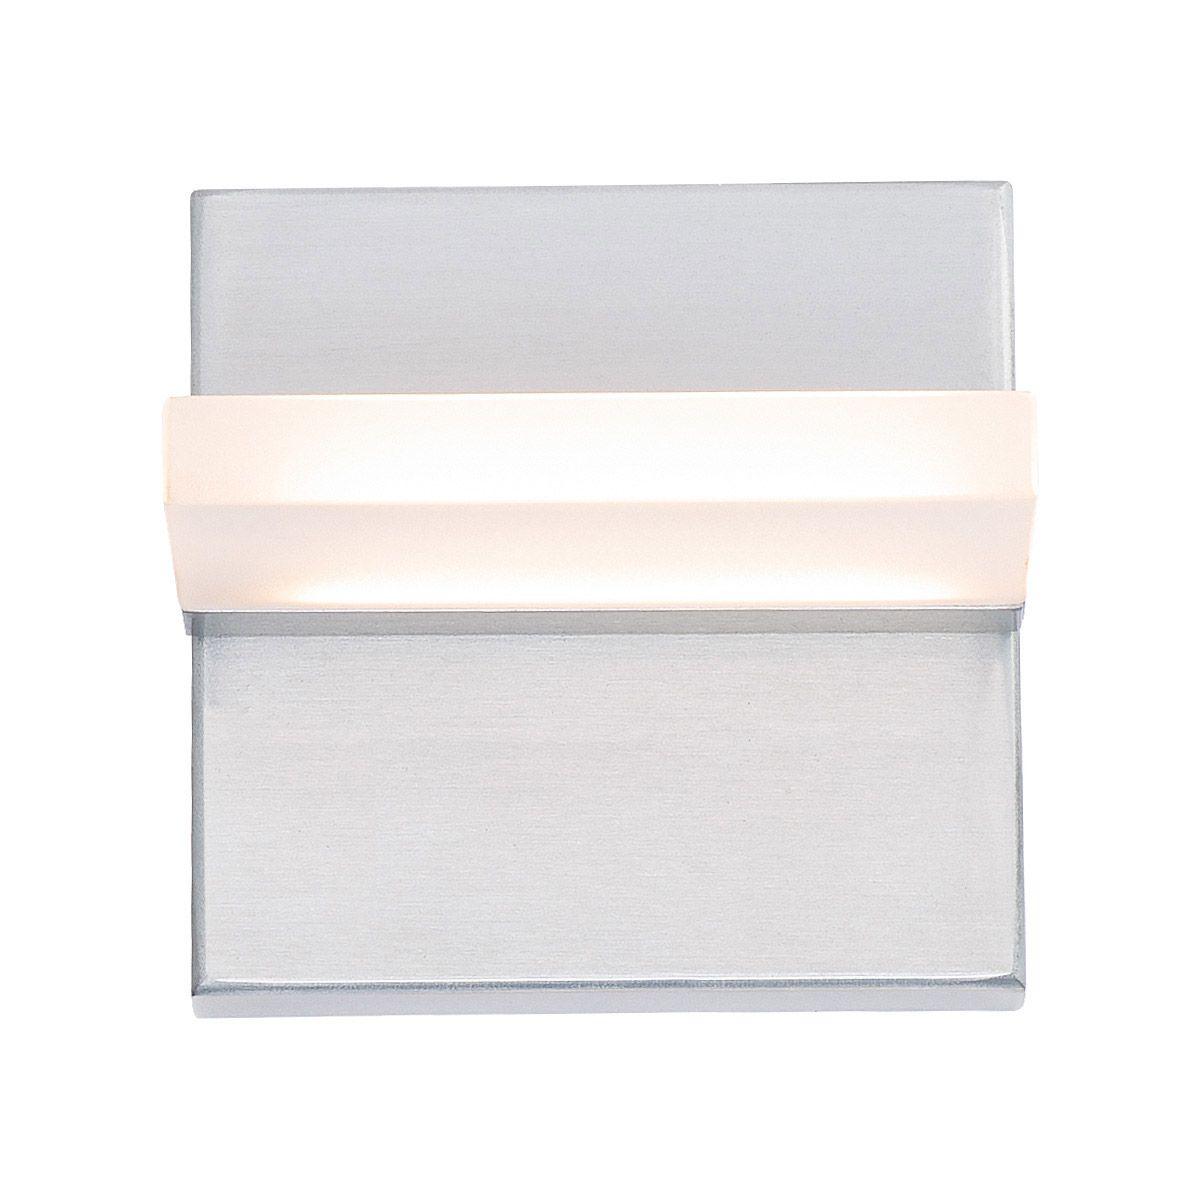 Oslo 5 in LED Outdoor Wall Sconce